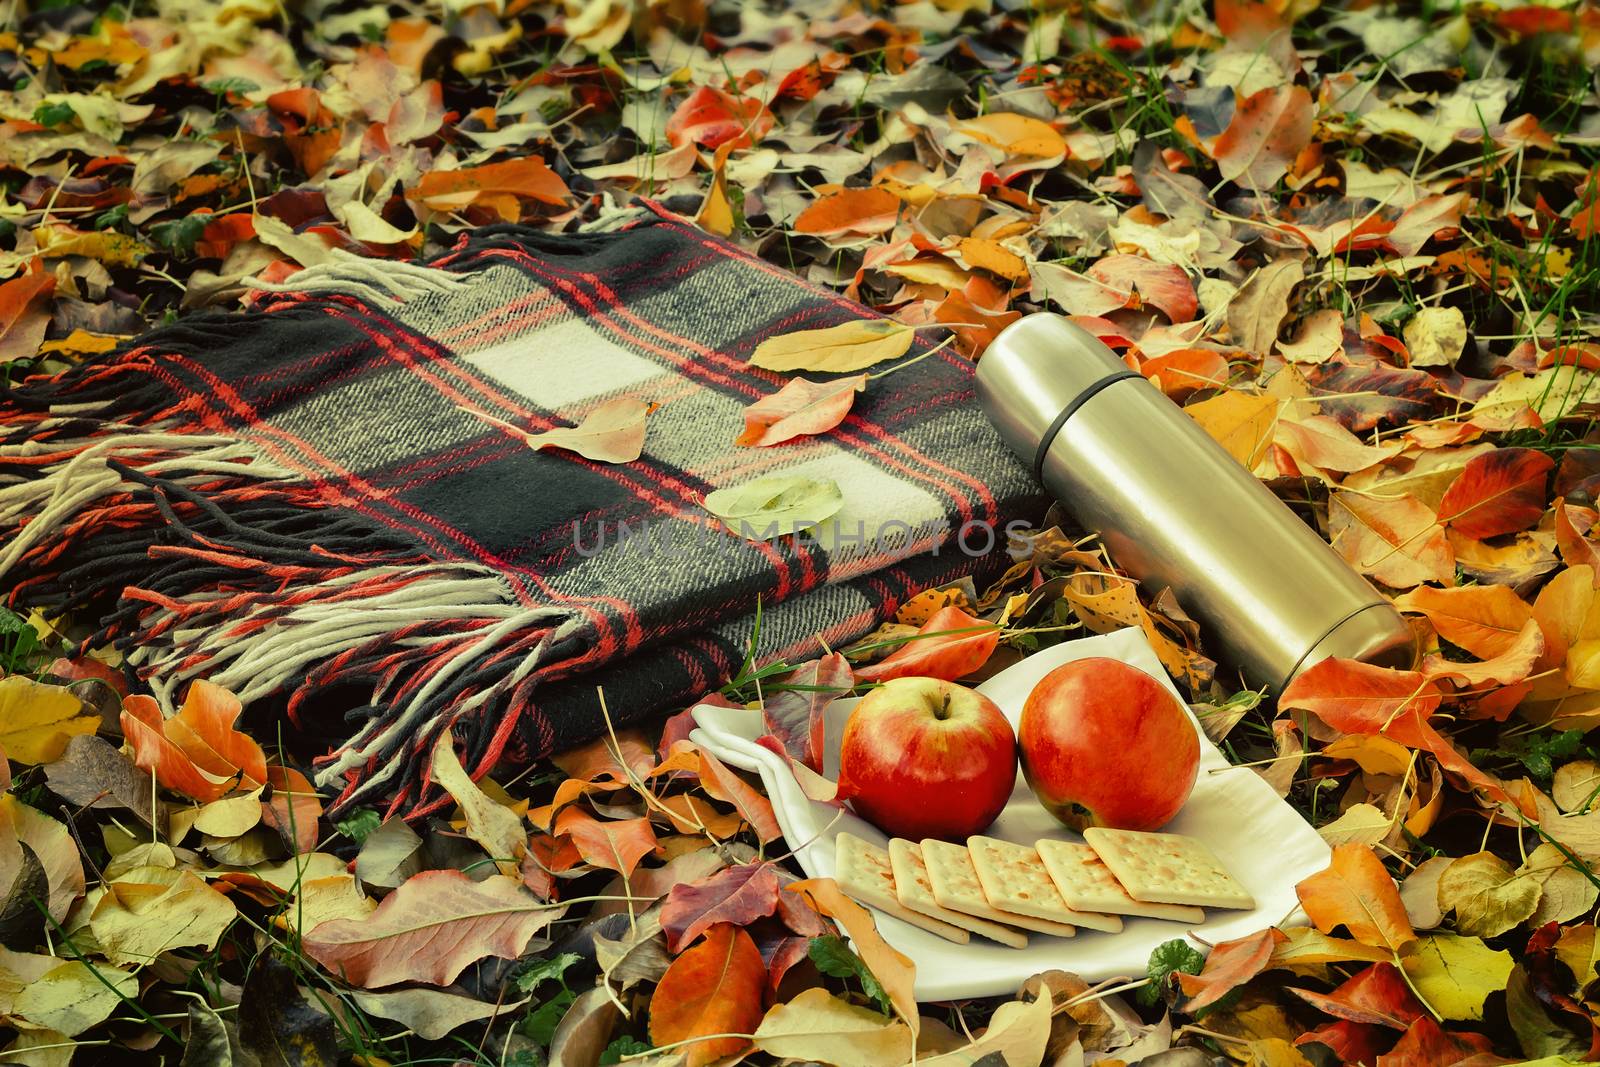 In the woods on the grass, covered with fallen leaves, lies a cozy blanket for relaxing and Breakfast: a thermos of coffee, cookies, apples.